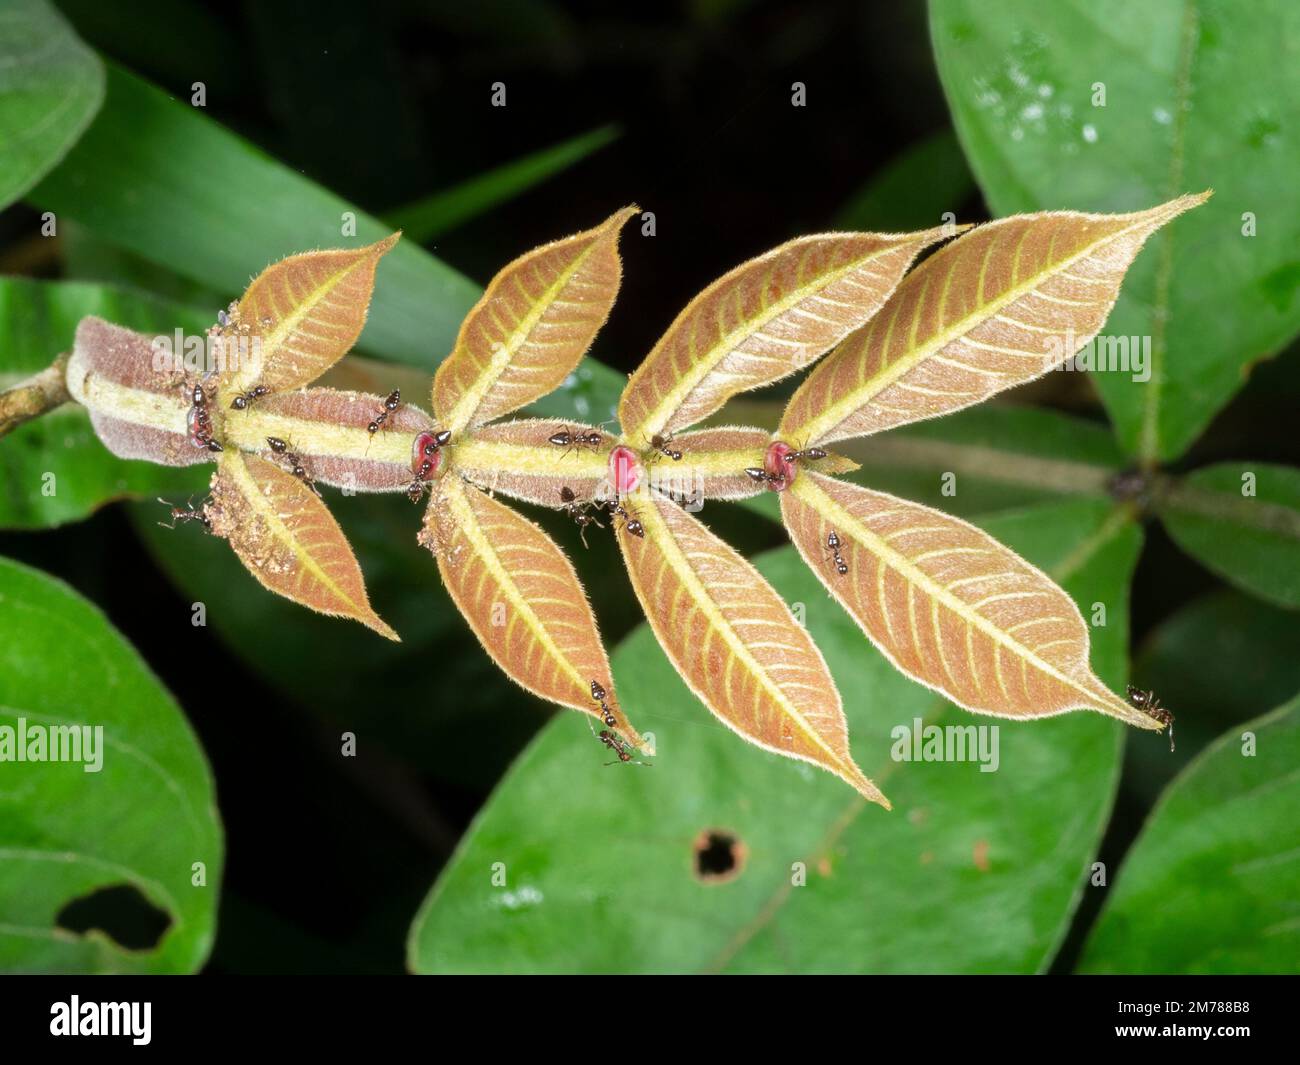 Ants drinking nectar from extra-floral nectaries on the leaf of an Inga tree in the rainforest, Ecuador Stock Photo